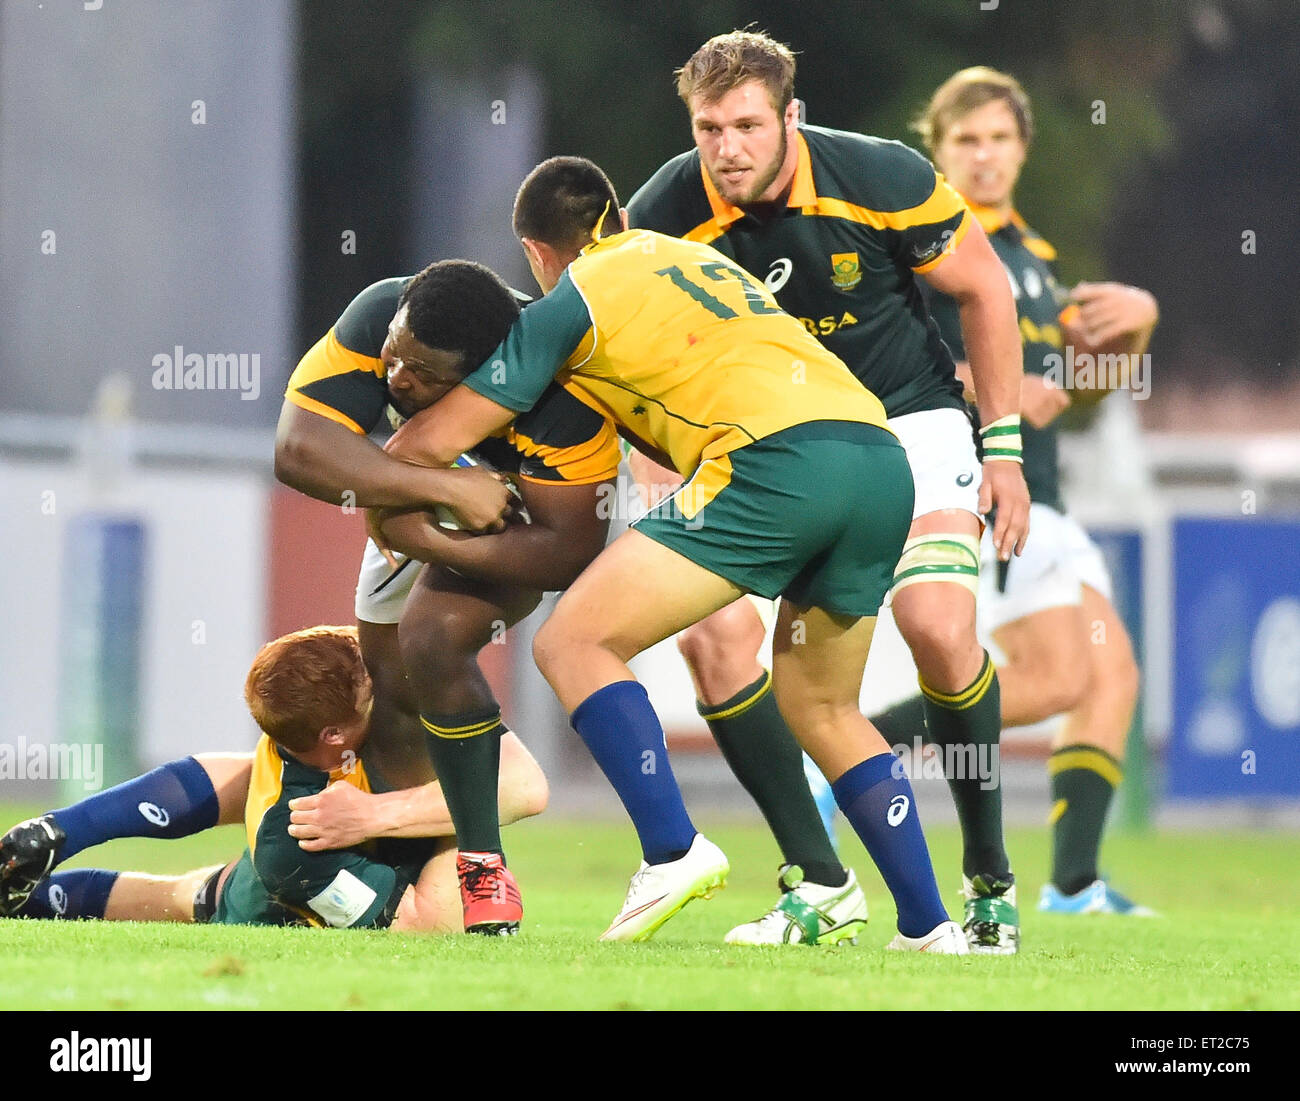 Calvisano, Italy. 10th June, 2015. Ox Nche of South Africa during the 2015 World Rugby U20 Championship match between South Africa and Australia at Stadio San Michele on June 10, 2015 in Calvisano, Italy. Credit:  Roger Sedres/Alamy Live News Stock Photo